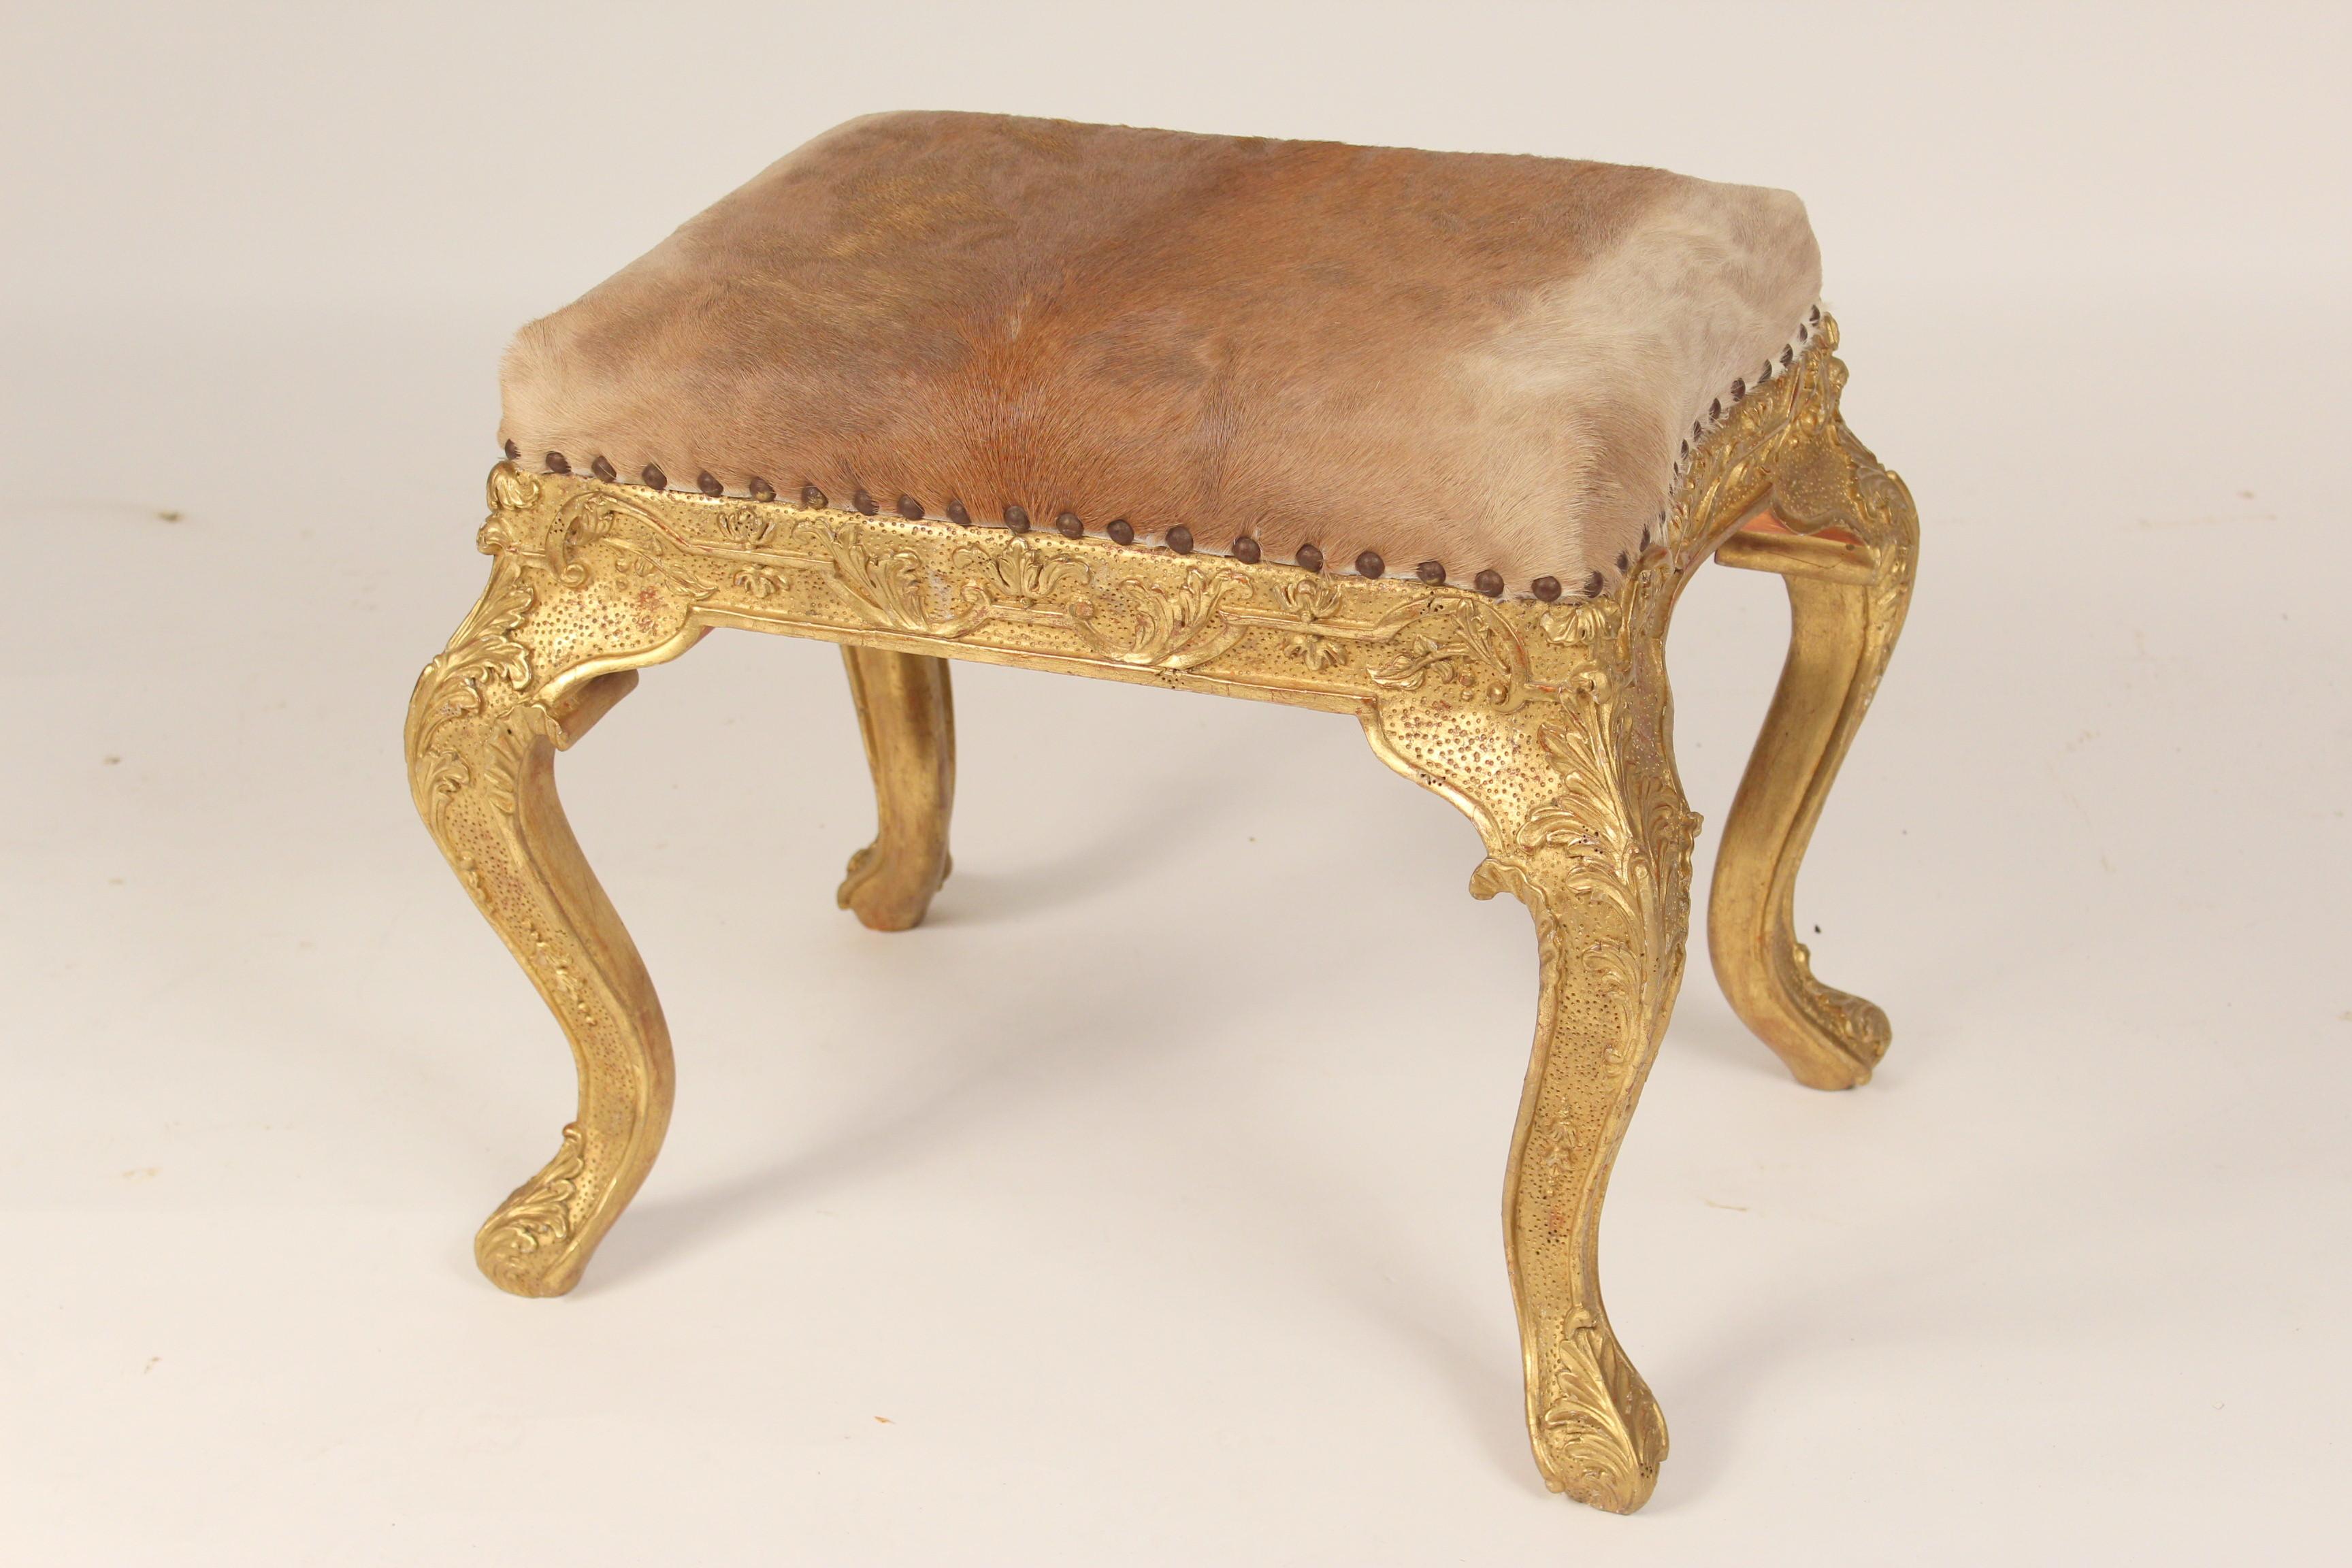 Pair of Louis XV style gilt wood benches (gold leaf) with cow hide upholstered seats, late 20th century. Seat dimensions, width 22